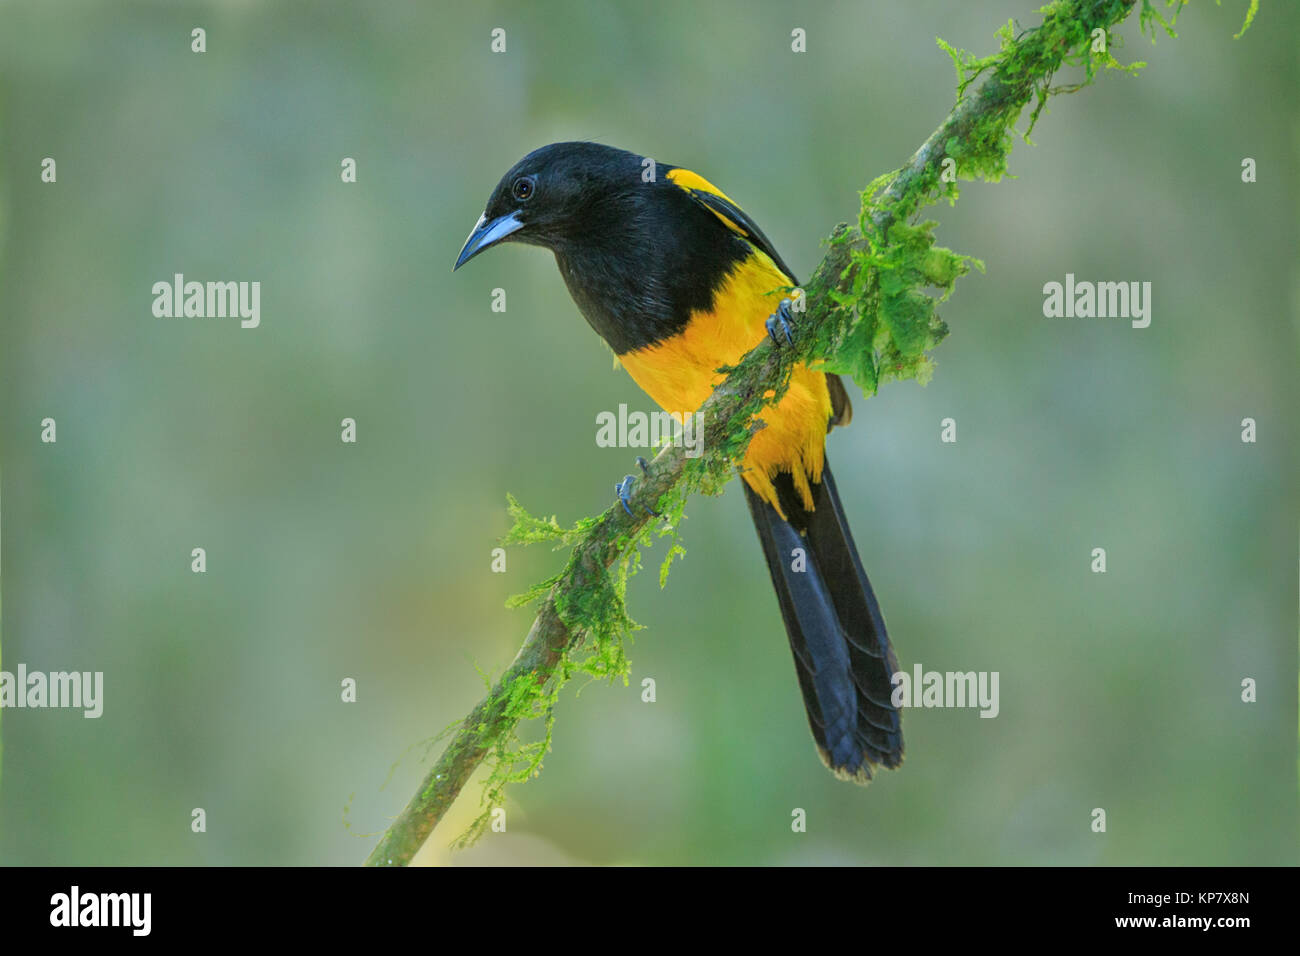 Black Vented Oriole On Branch In Costa Rica Rain Forest Stock Photo